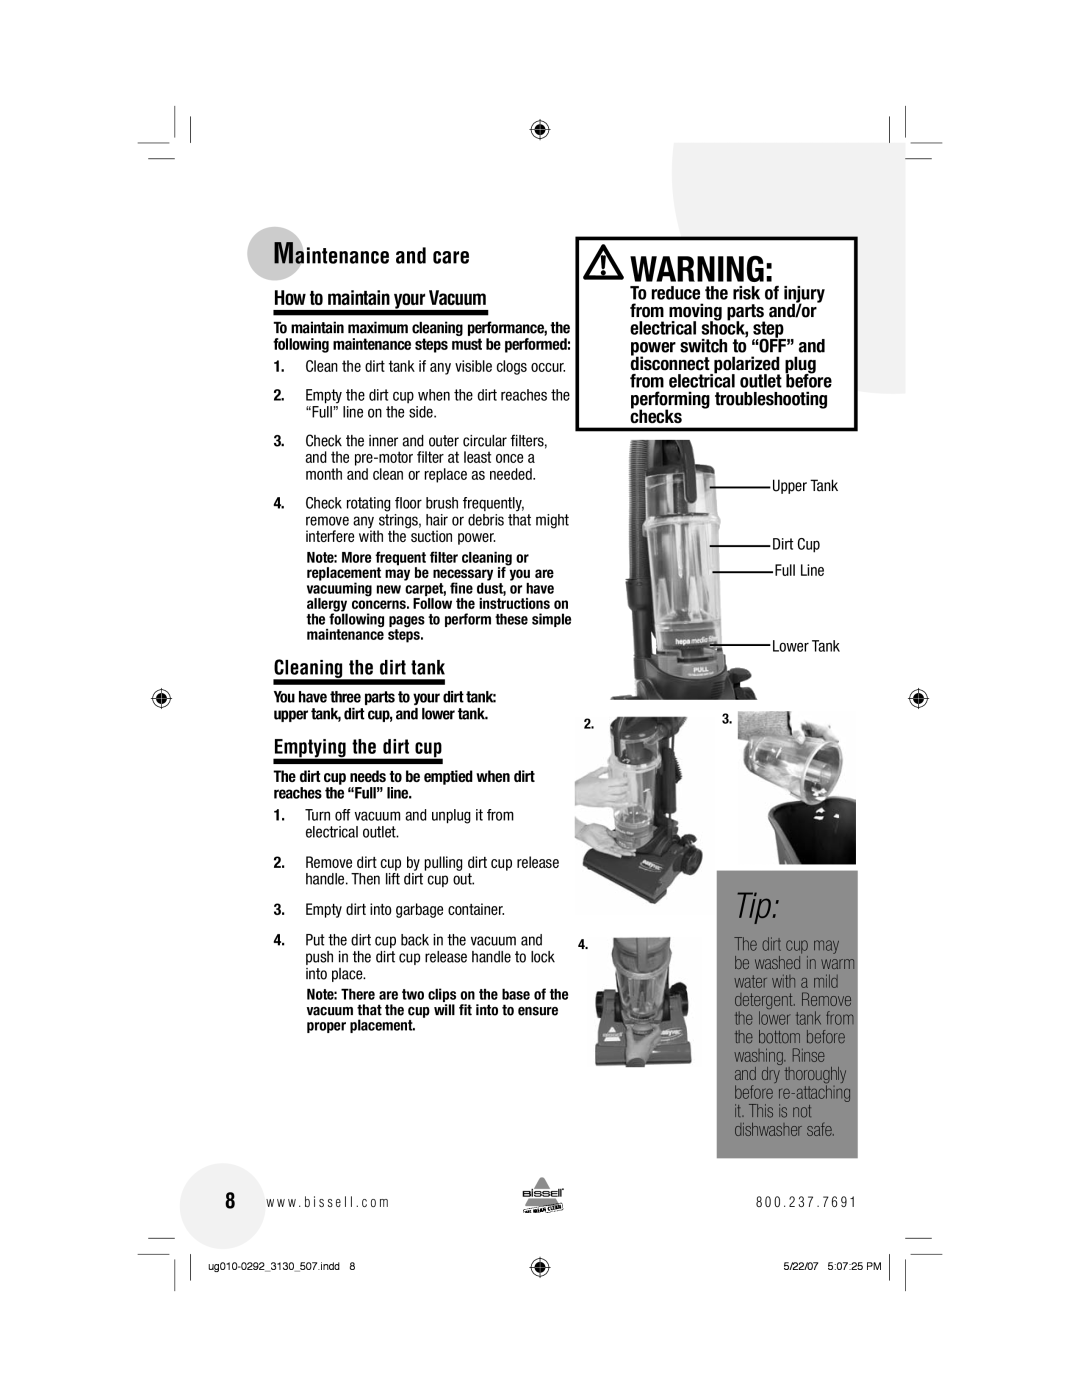 Bissell 3130 warranty Maintenance and care, How to maintain your Vacuum, Cleaning the dirt tank, Emptying the dirt cup 